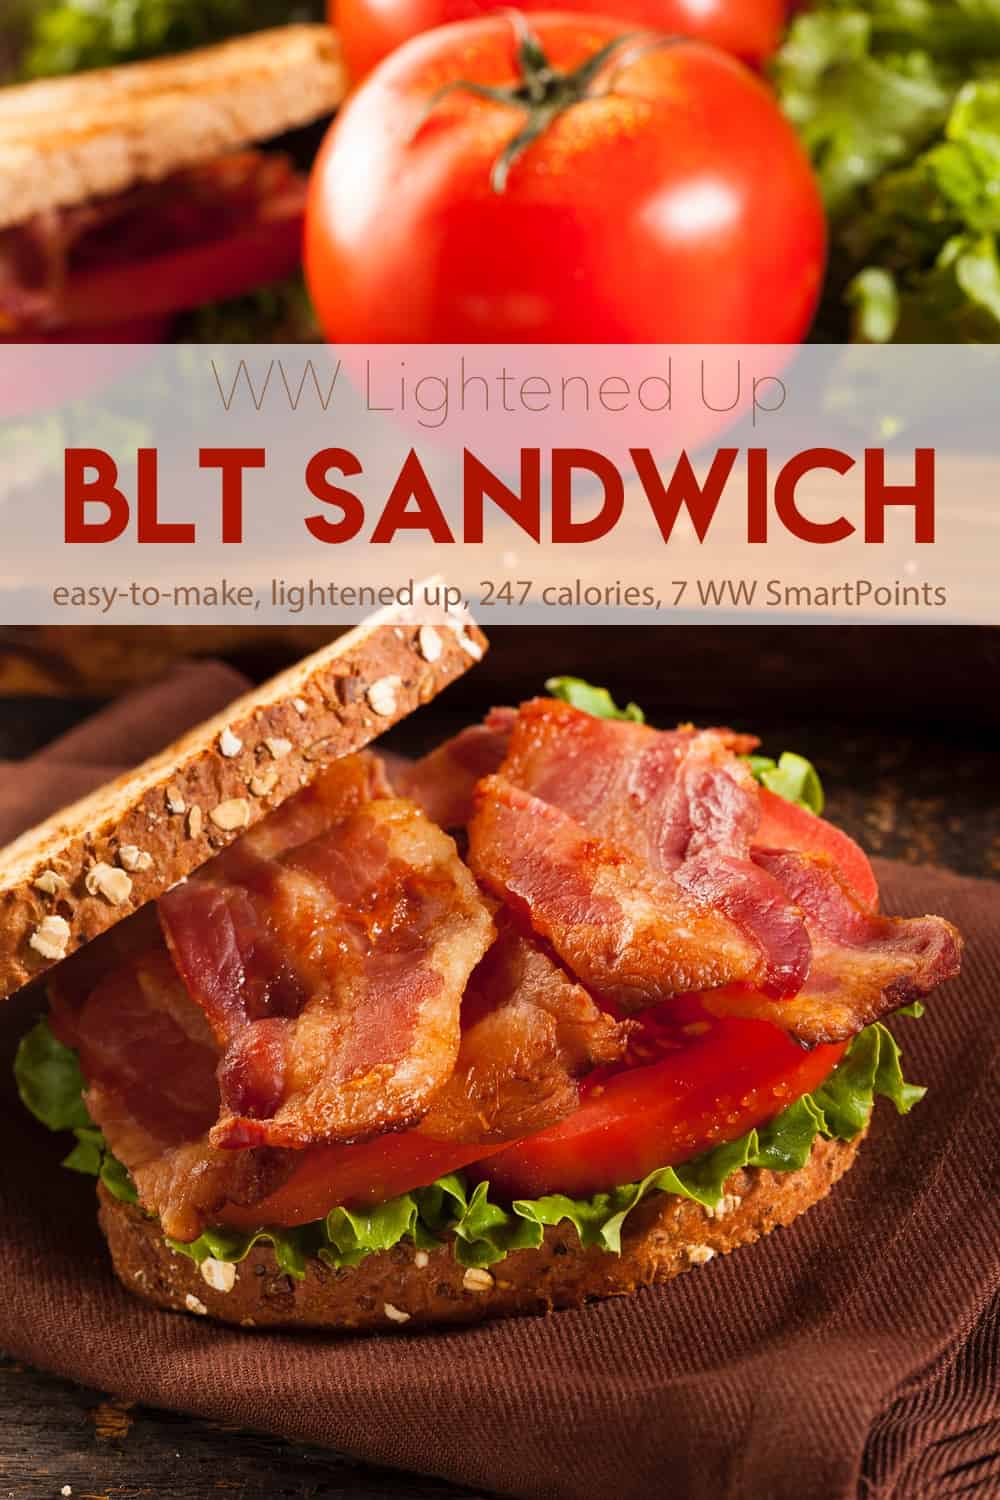 BLT sandwich on brown napkin with whole tomato and second BLT in background.